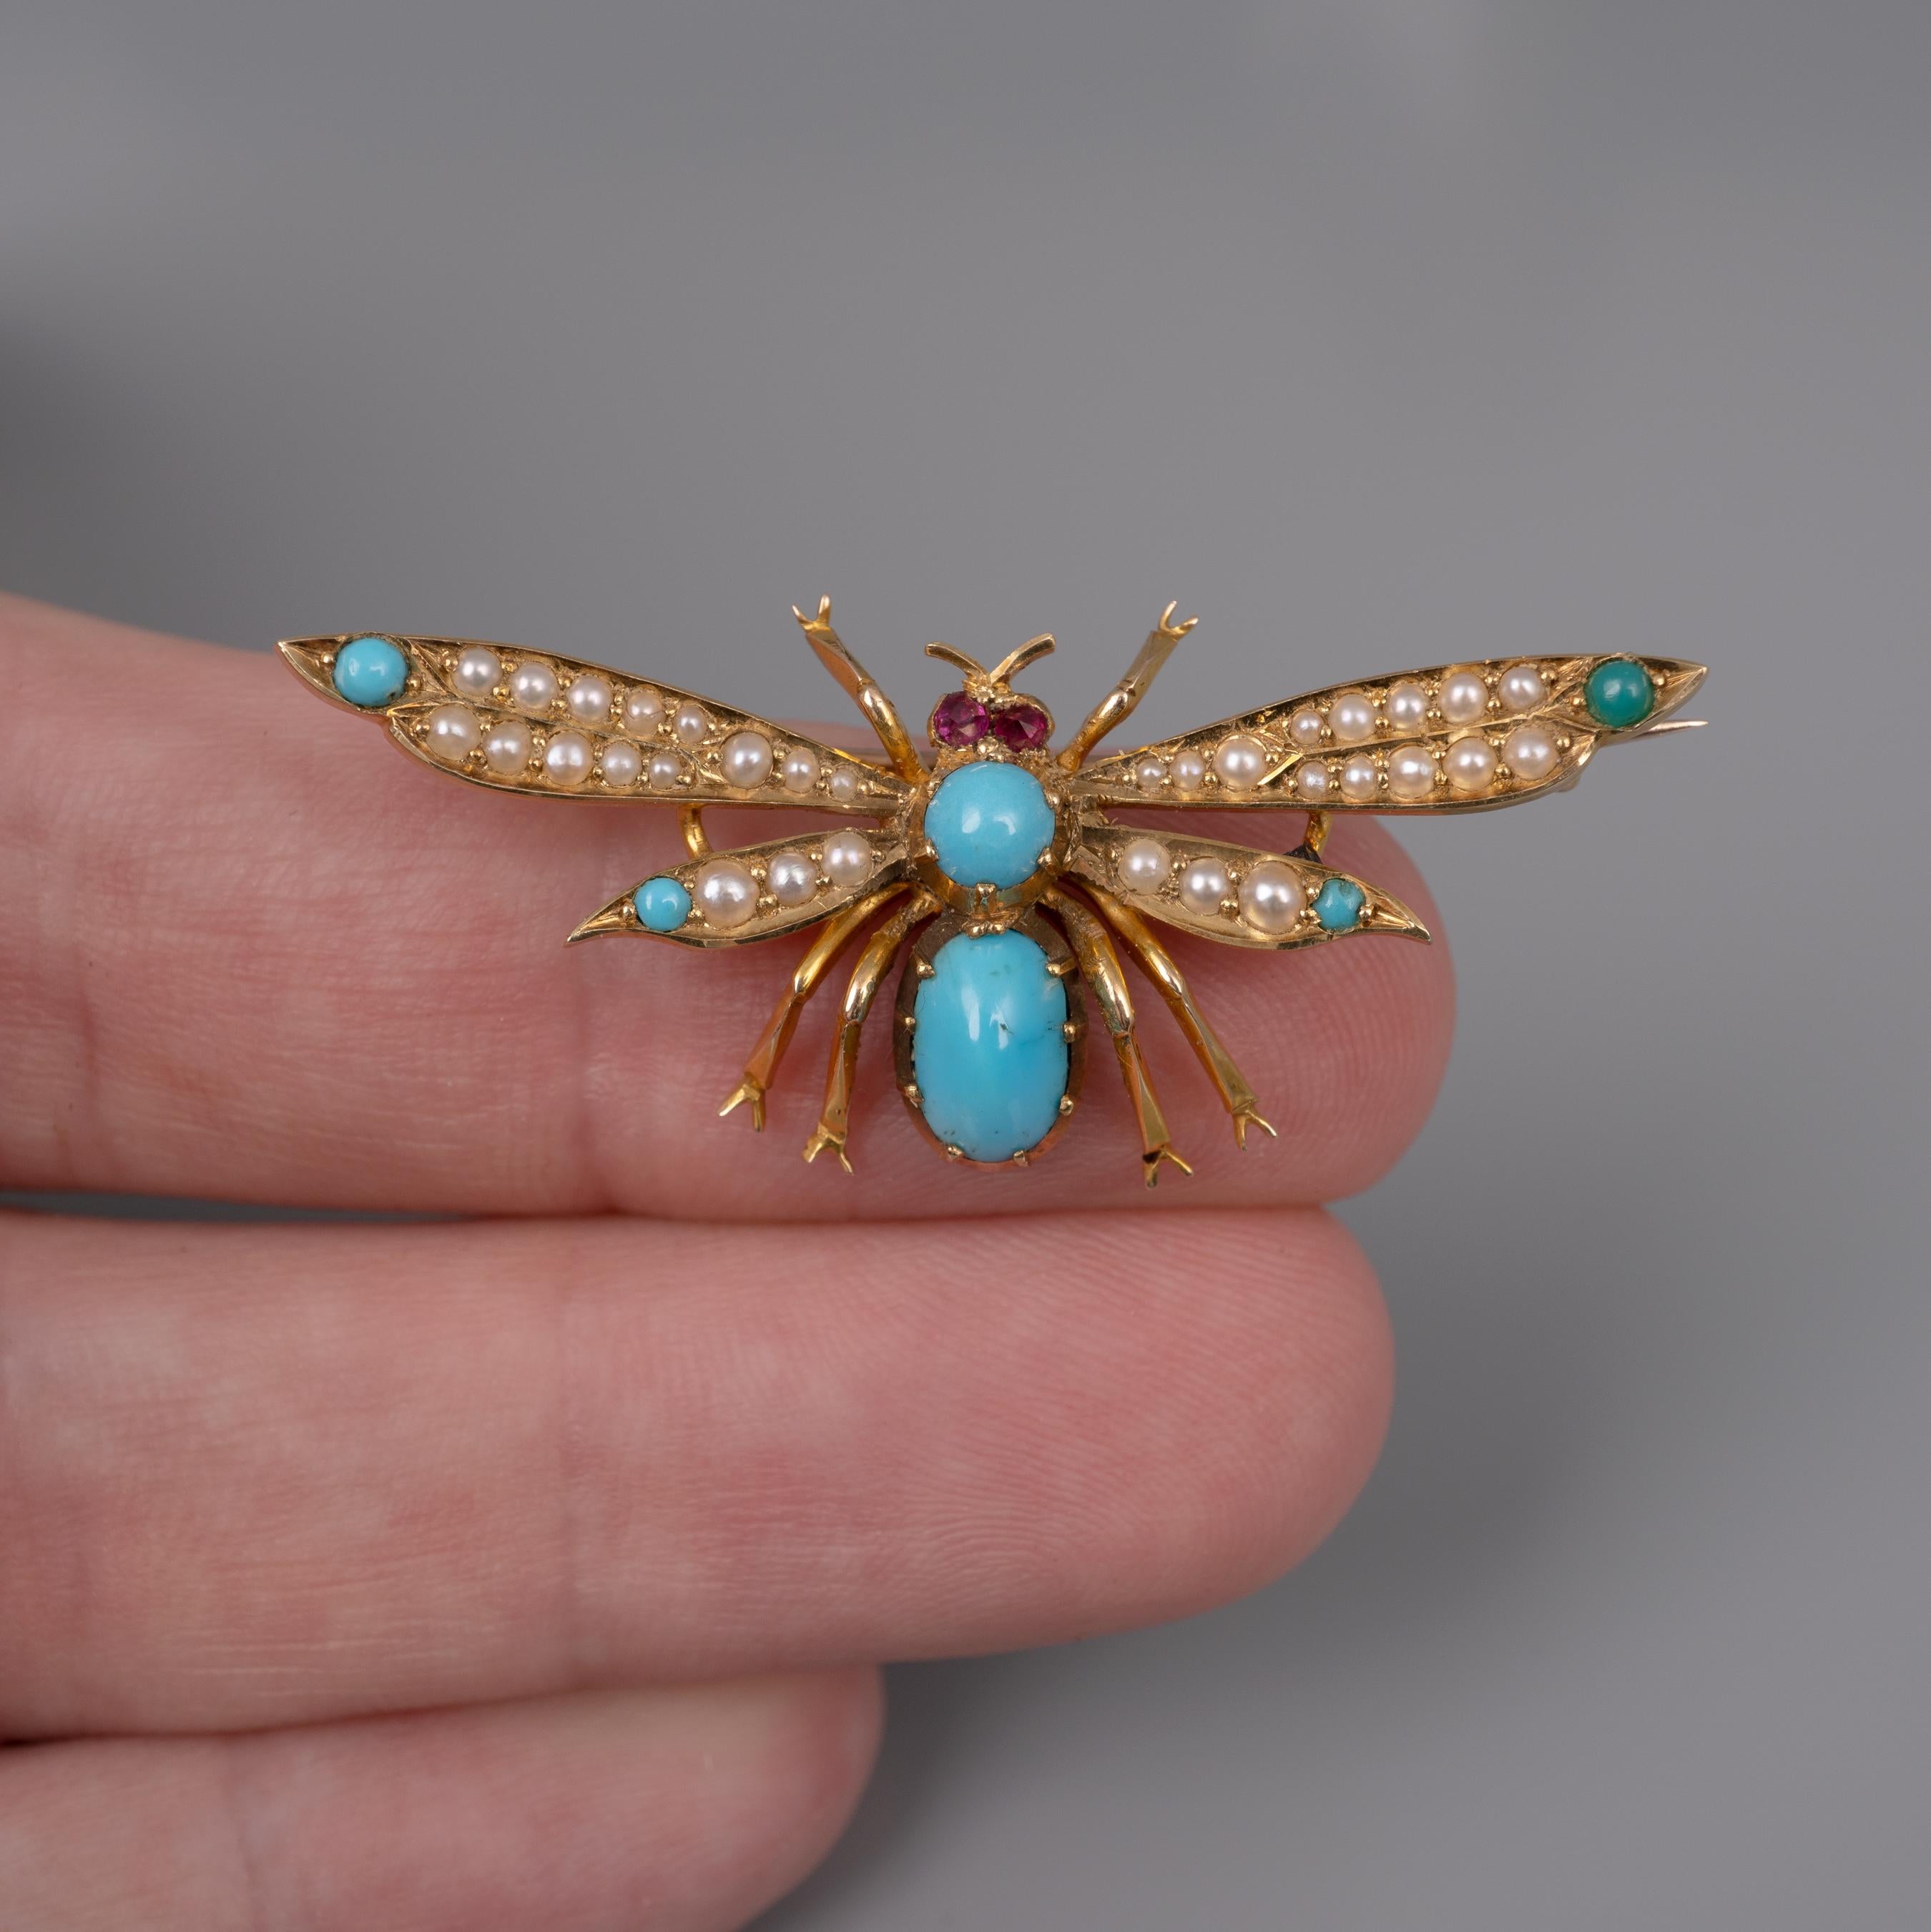 Antique turquoise, pearl and ruby insect brooch crafted in 15 karat yellow gold.

This fabulous double-winged insect brooch is set with natural turquoise to its body and wing tips with seed pearls to the wings and little ruby eyes. It is quite a